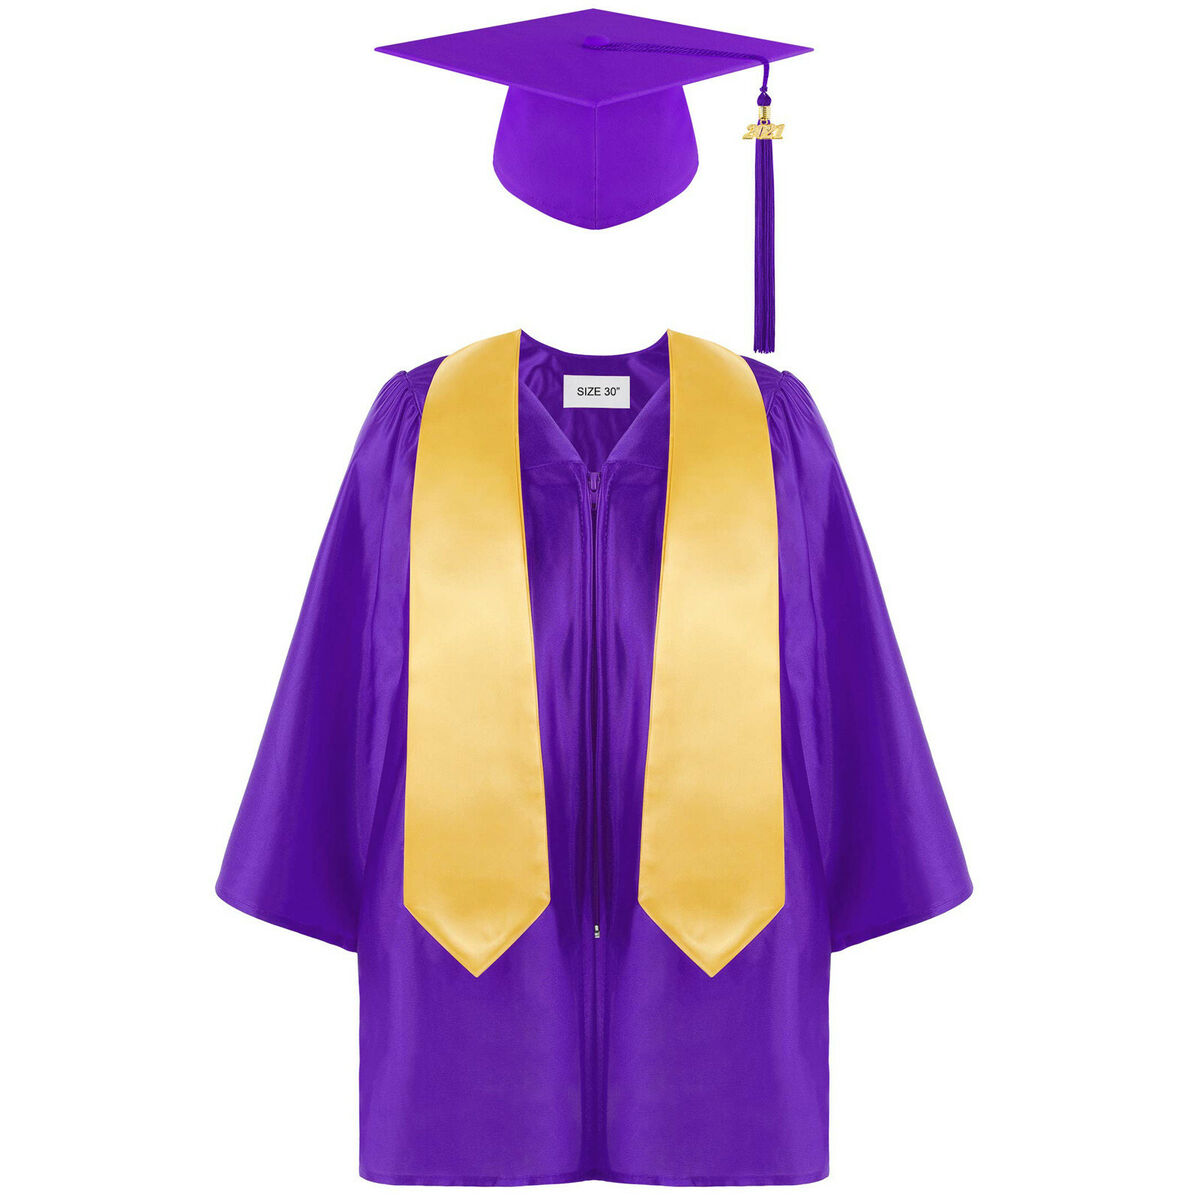 Children's Graduation Gown and Cap Set - Early Years Shop